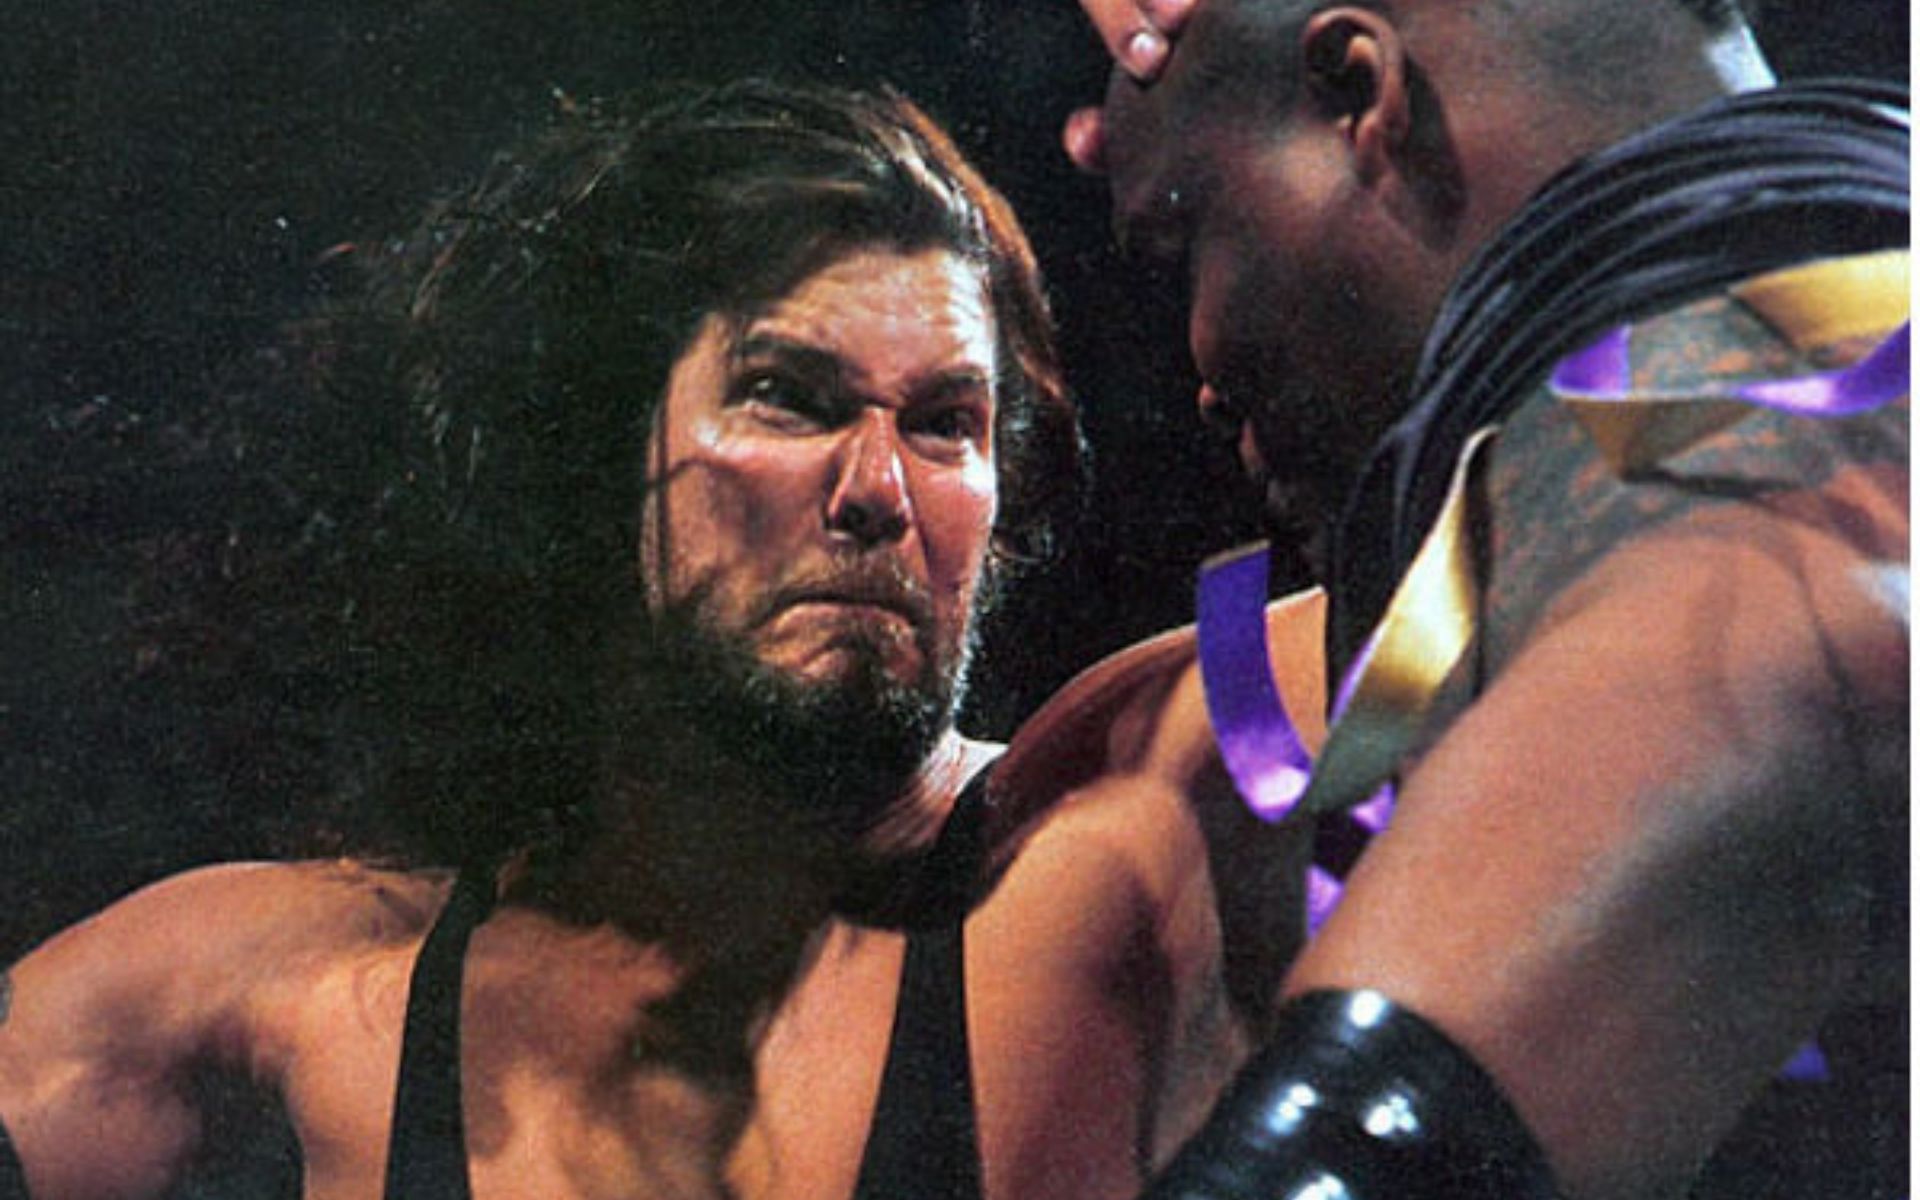 Big Daddy Cool battling King Mabel at SummerSlam for the WWF Championship.